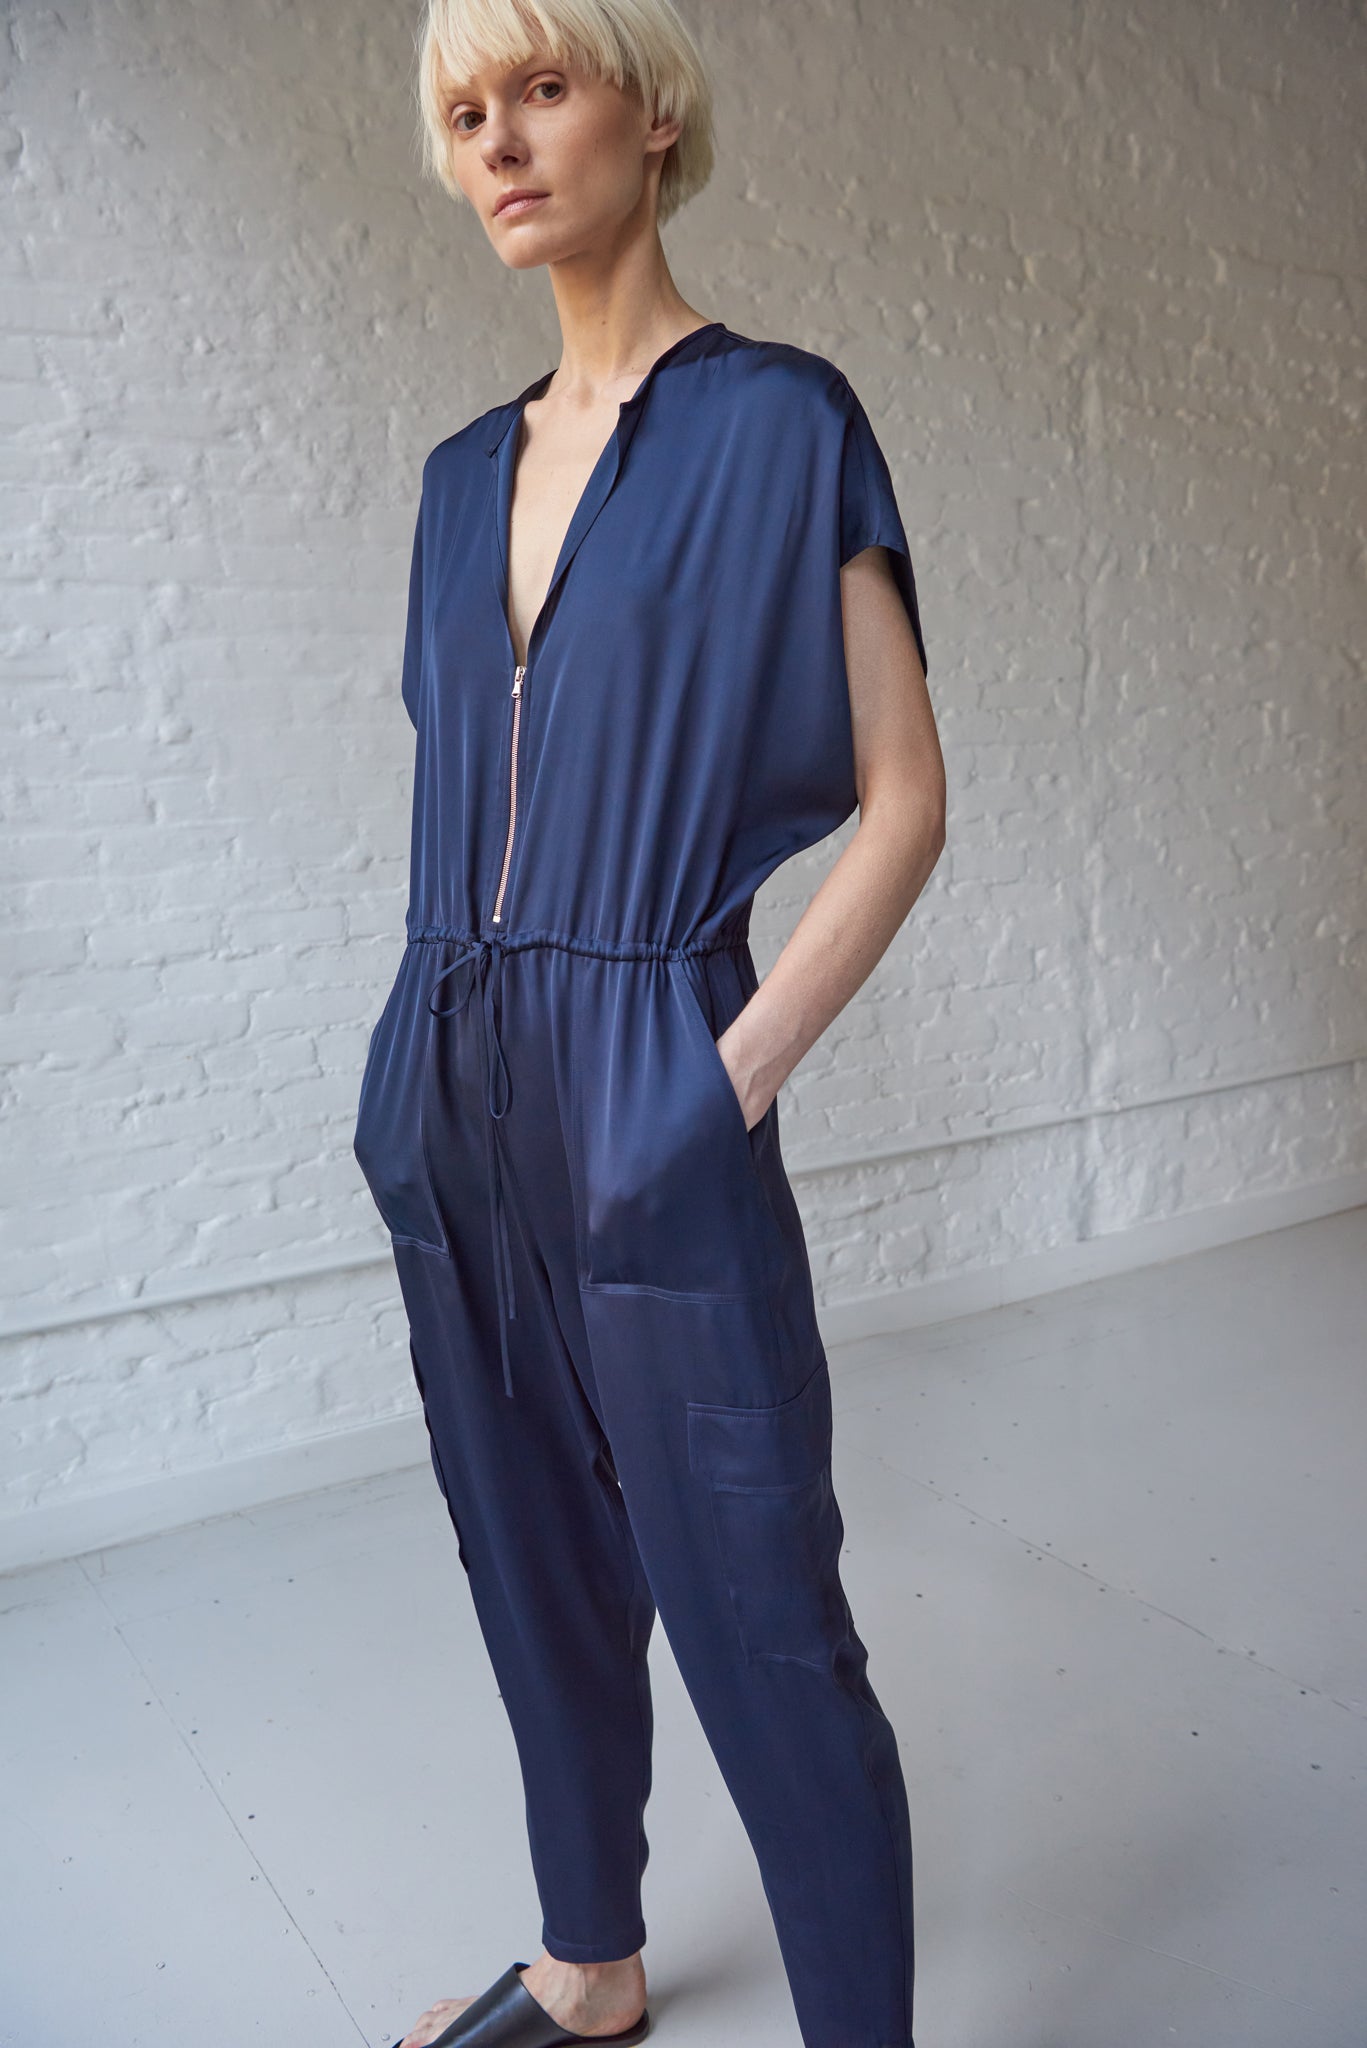 Women's v-neck zip front navy satin jumpsuit with pockets